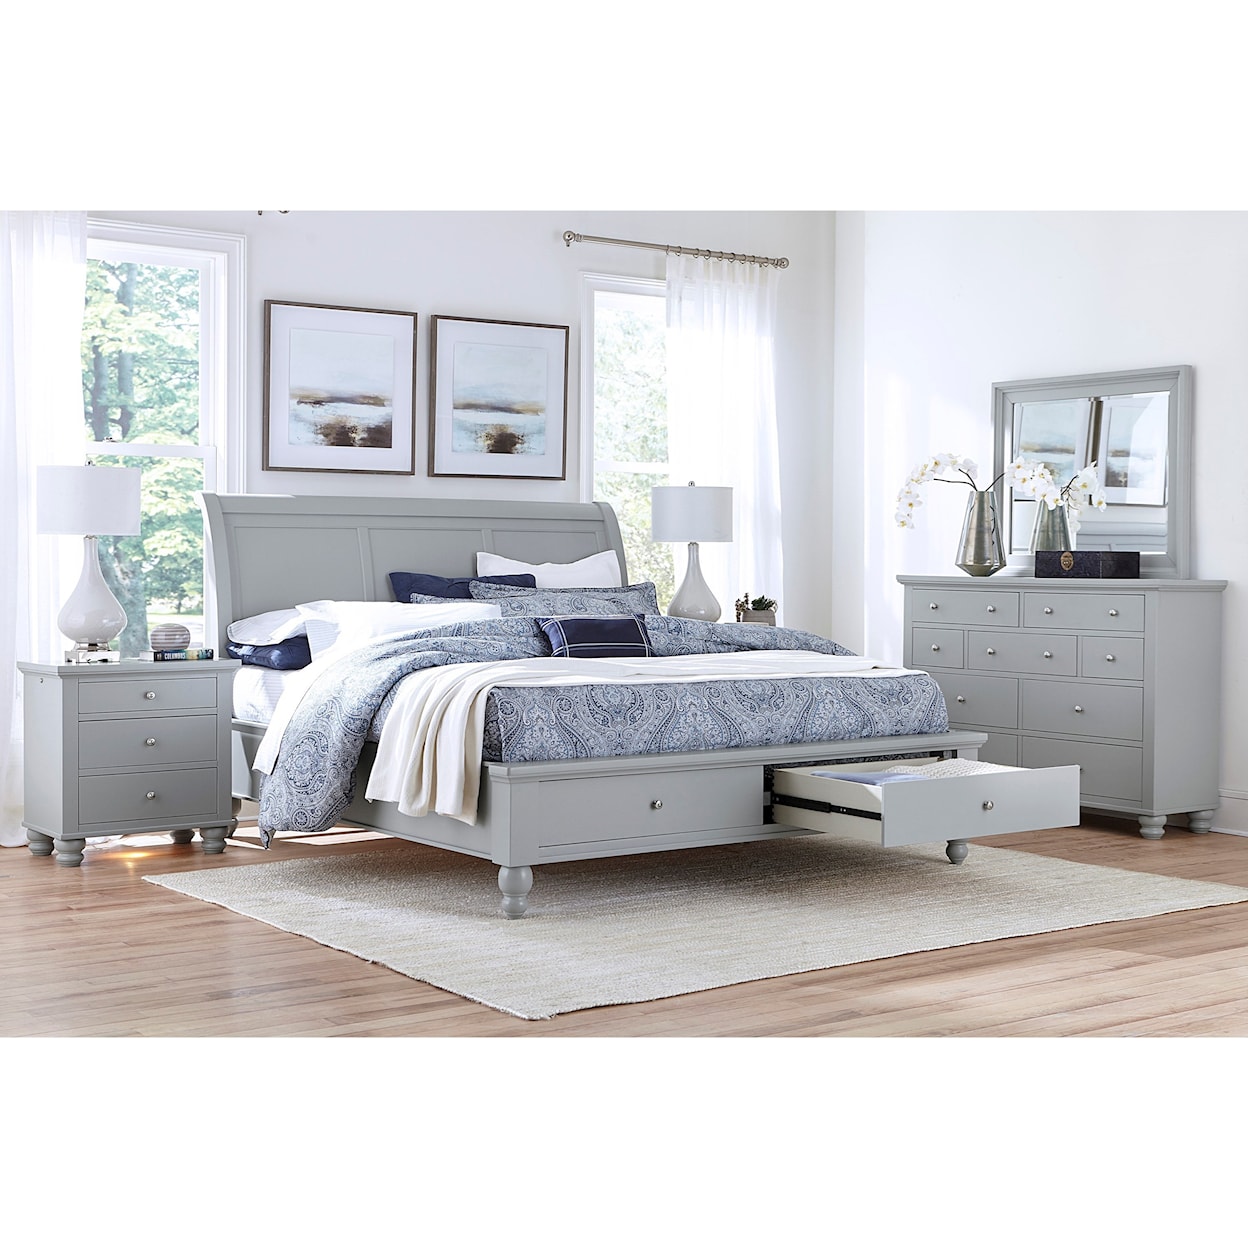 Aspenhome Clinton King Sleigh Bed With Storage Drawers